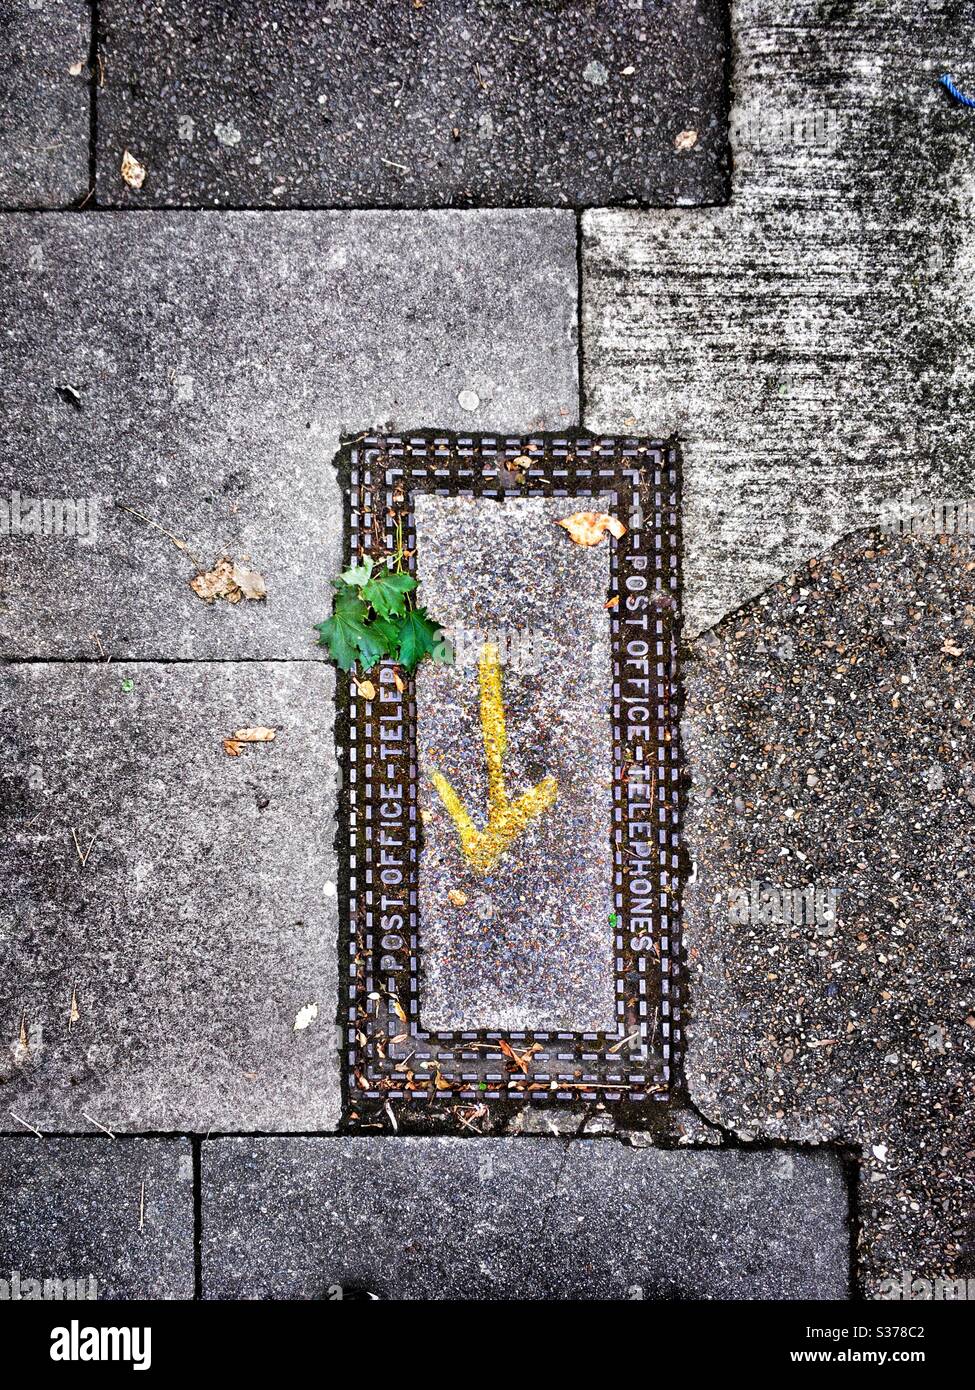 A yellow arrow on a city pavement in an ornamental frame mysteriously points towards something unseen. A green leaf breaks into the picture. A striking pattern of paving slabs surrounds the frame. Stock Photo